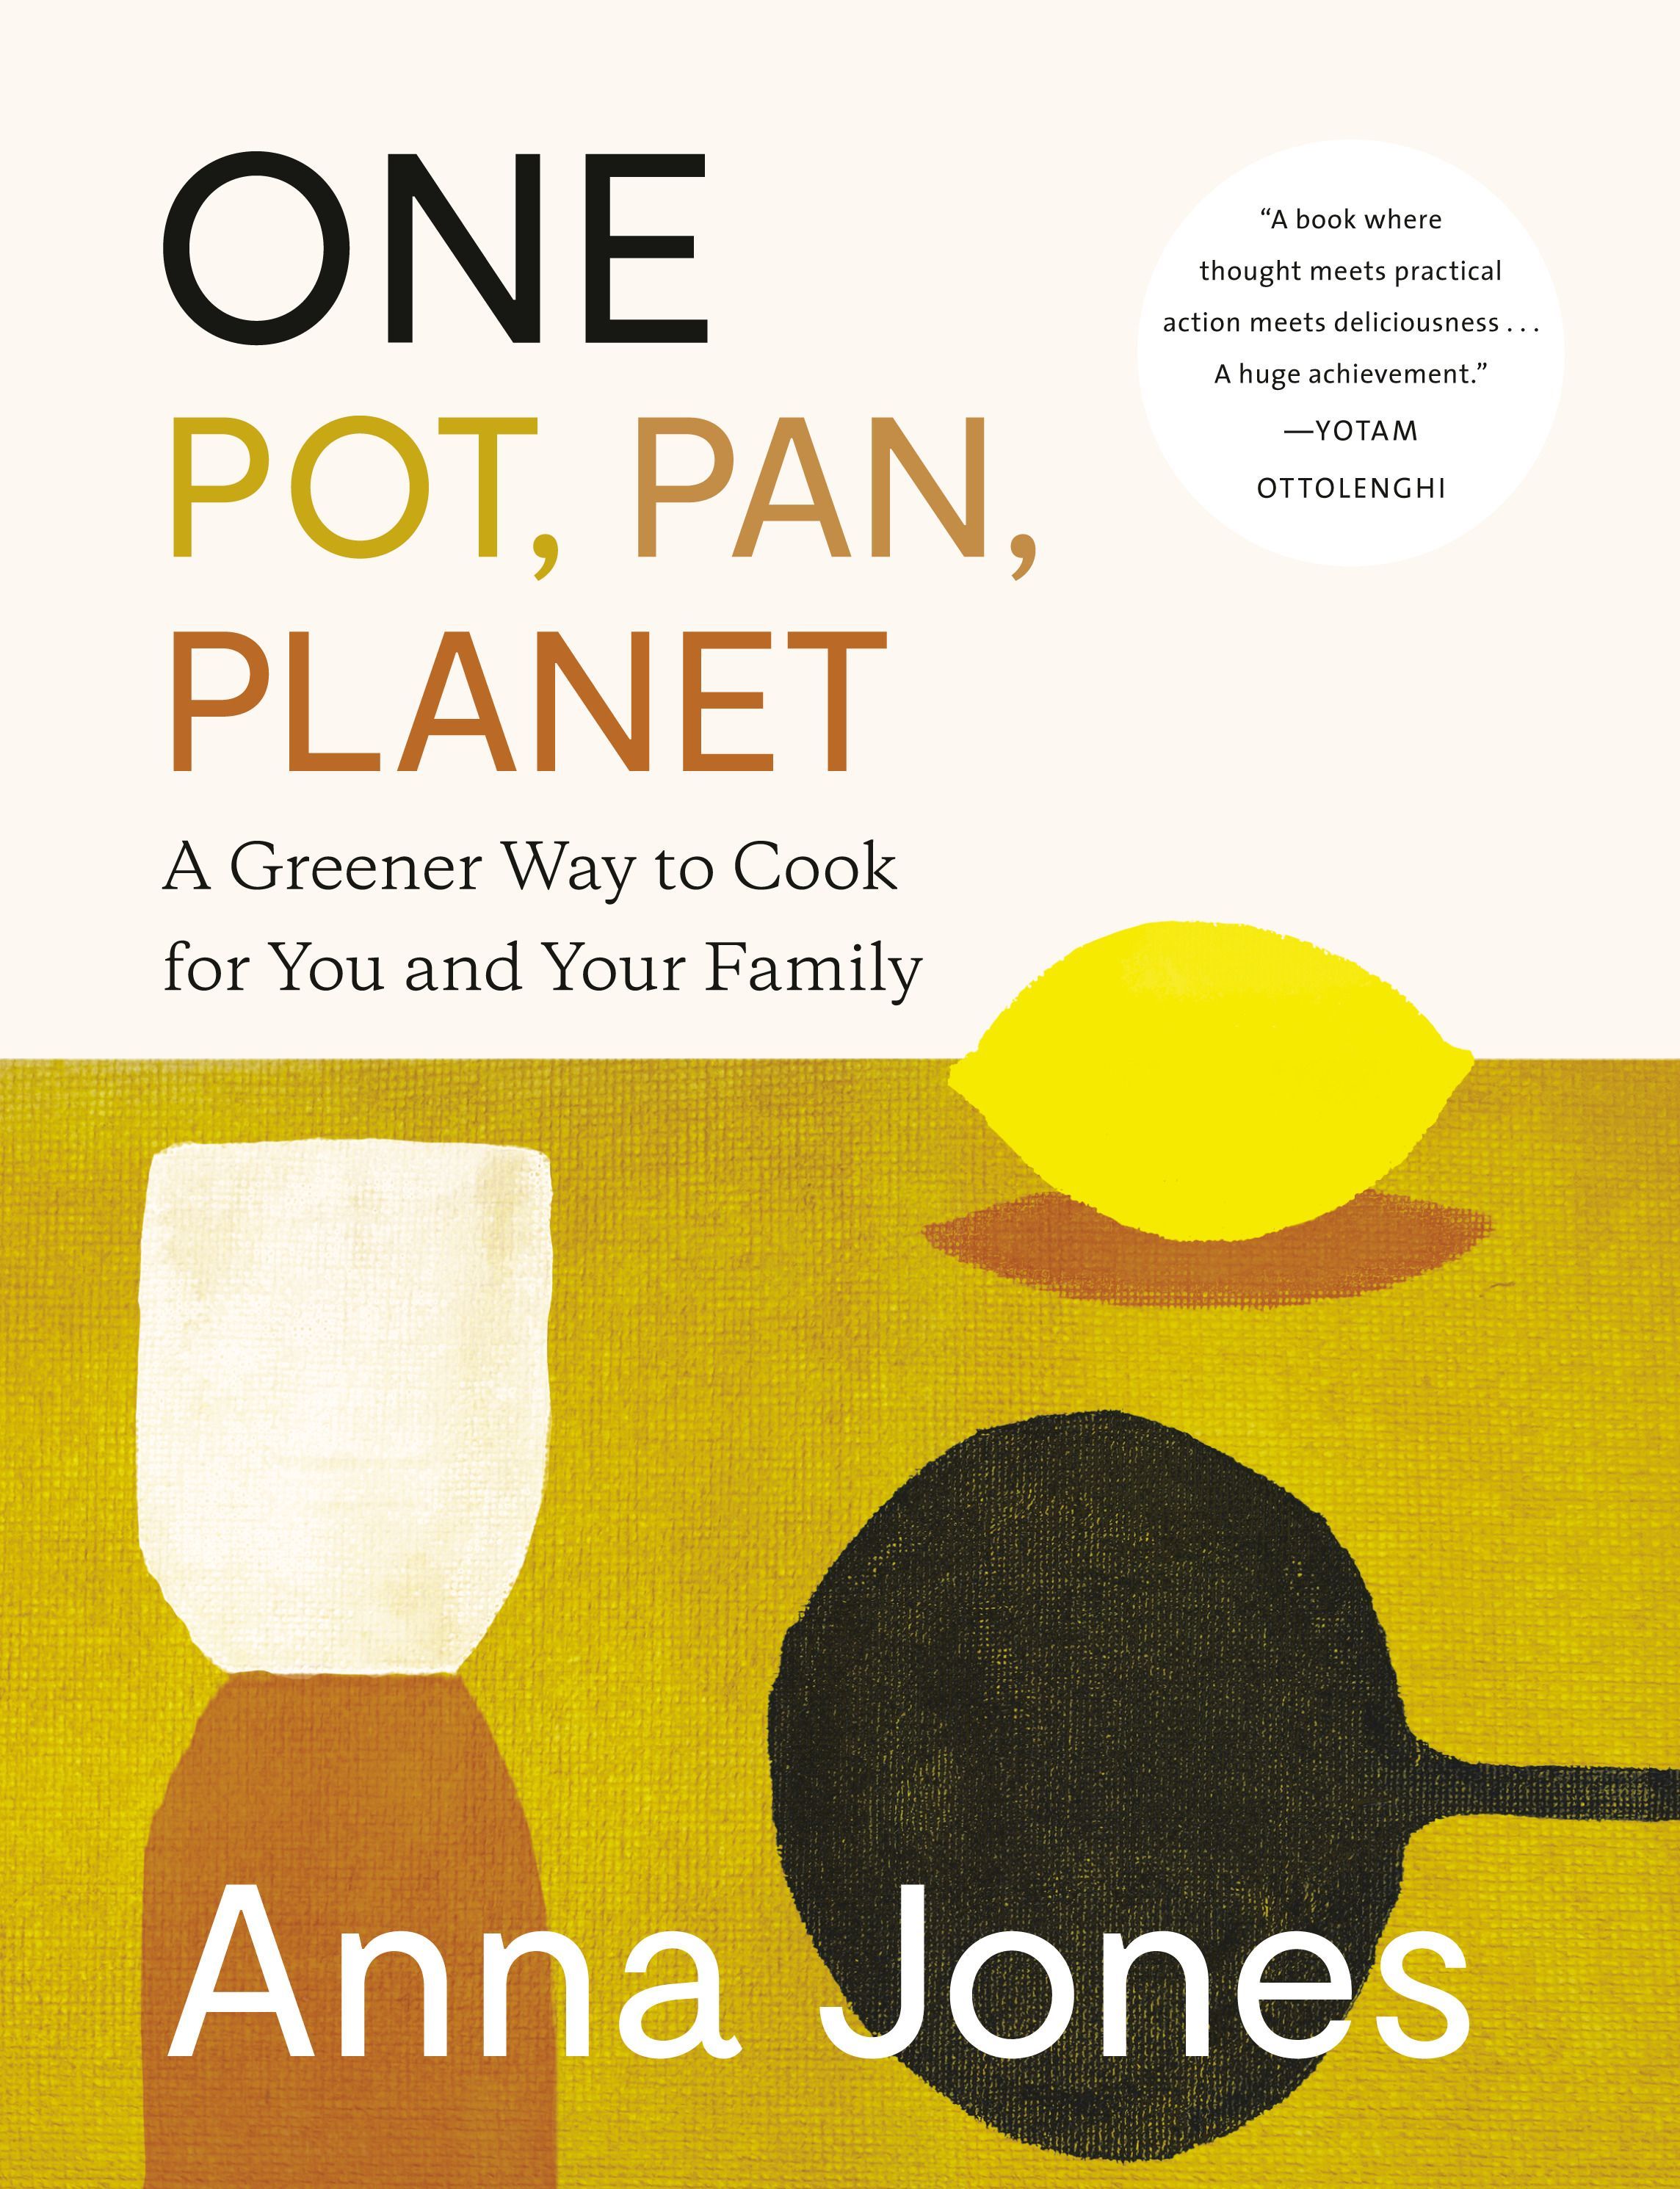 A Greener Way to Cook: Joyful, Delicious Recipes for One-Pot Meals That Are Good for You and the Planet